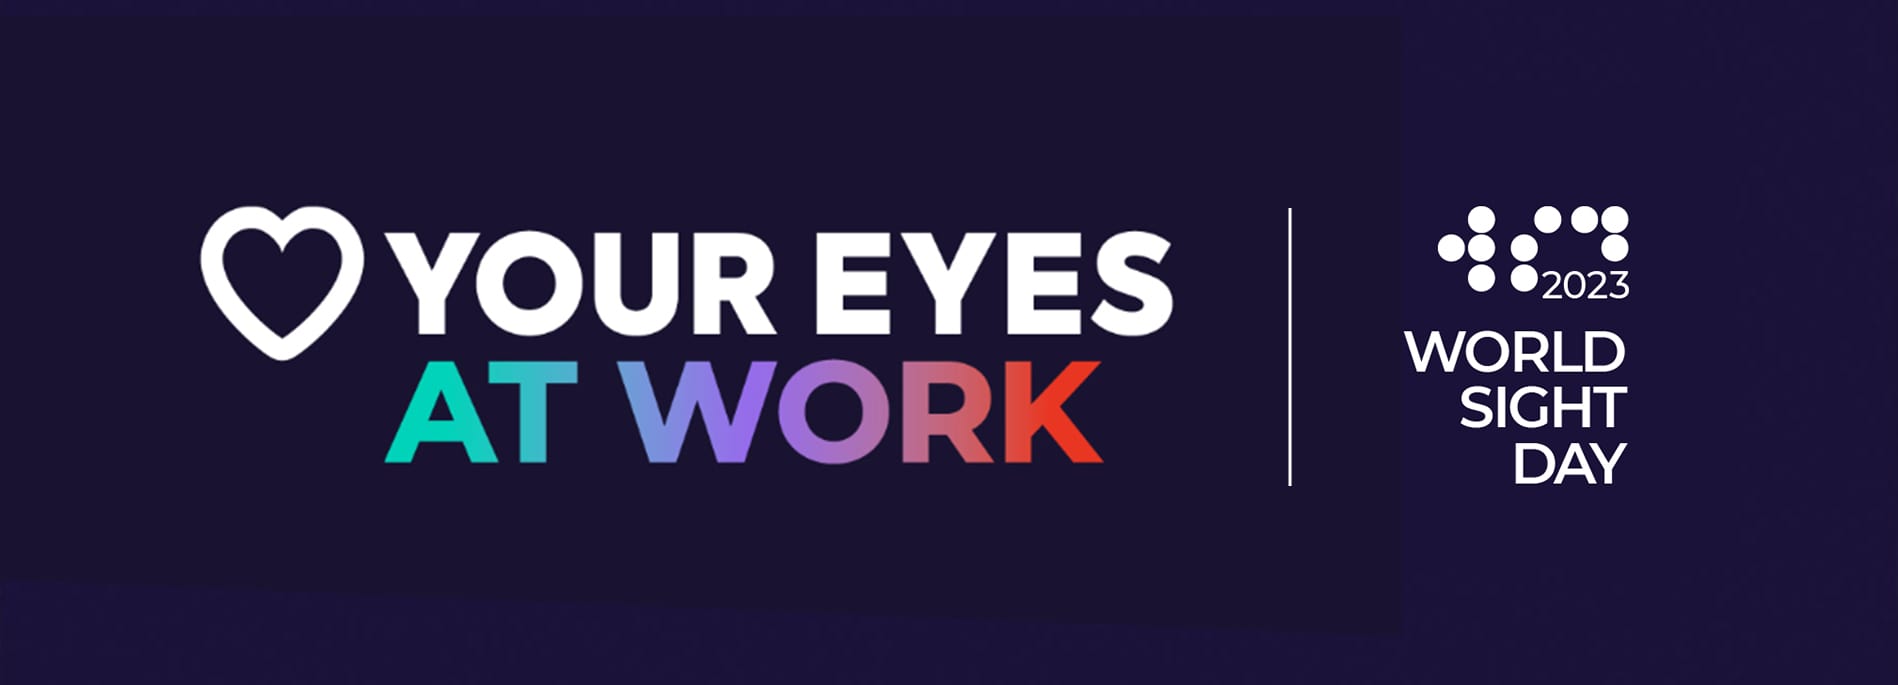 Love your eyes at work - Wolrd Sight Day 2023